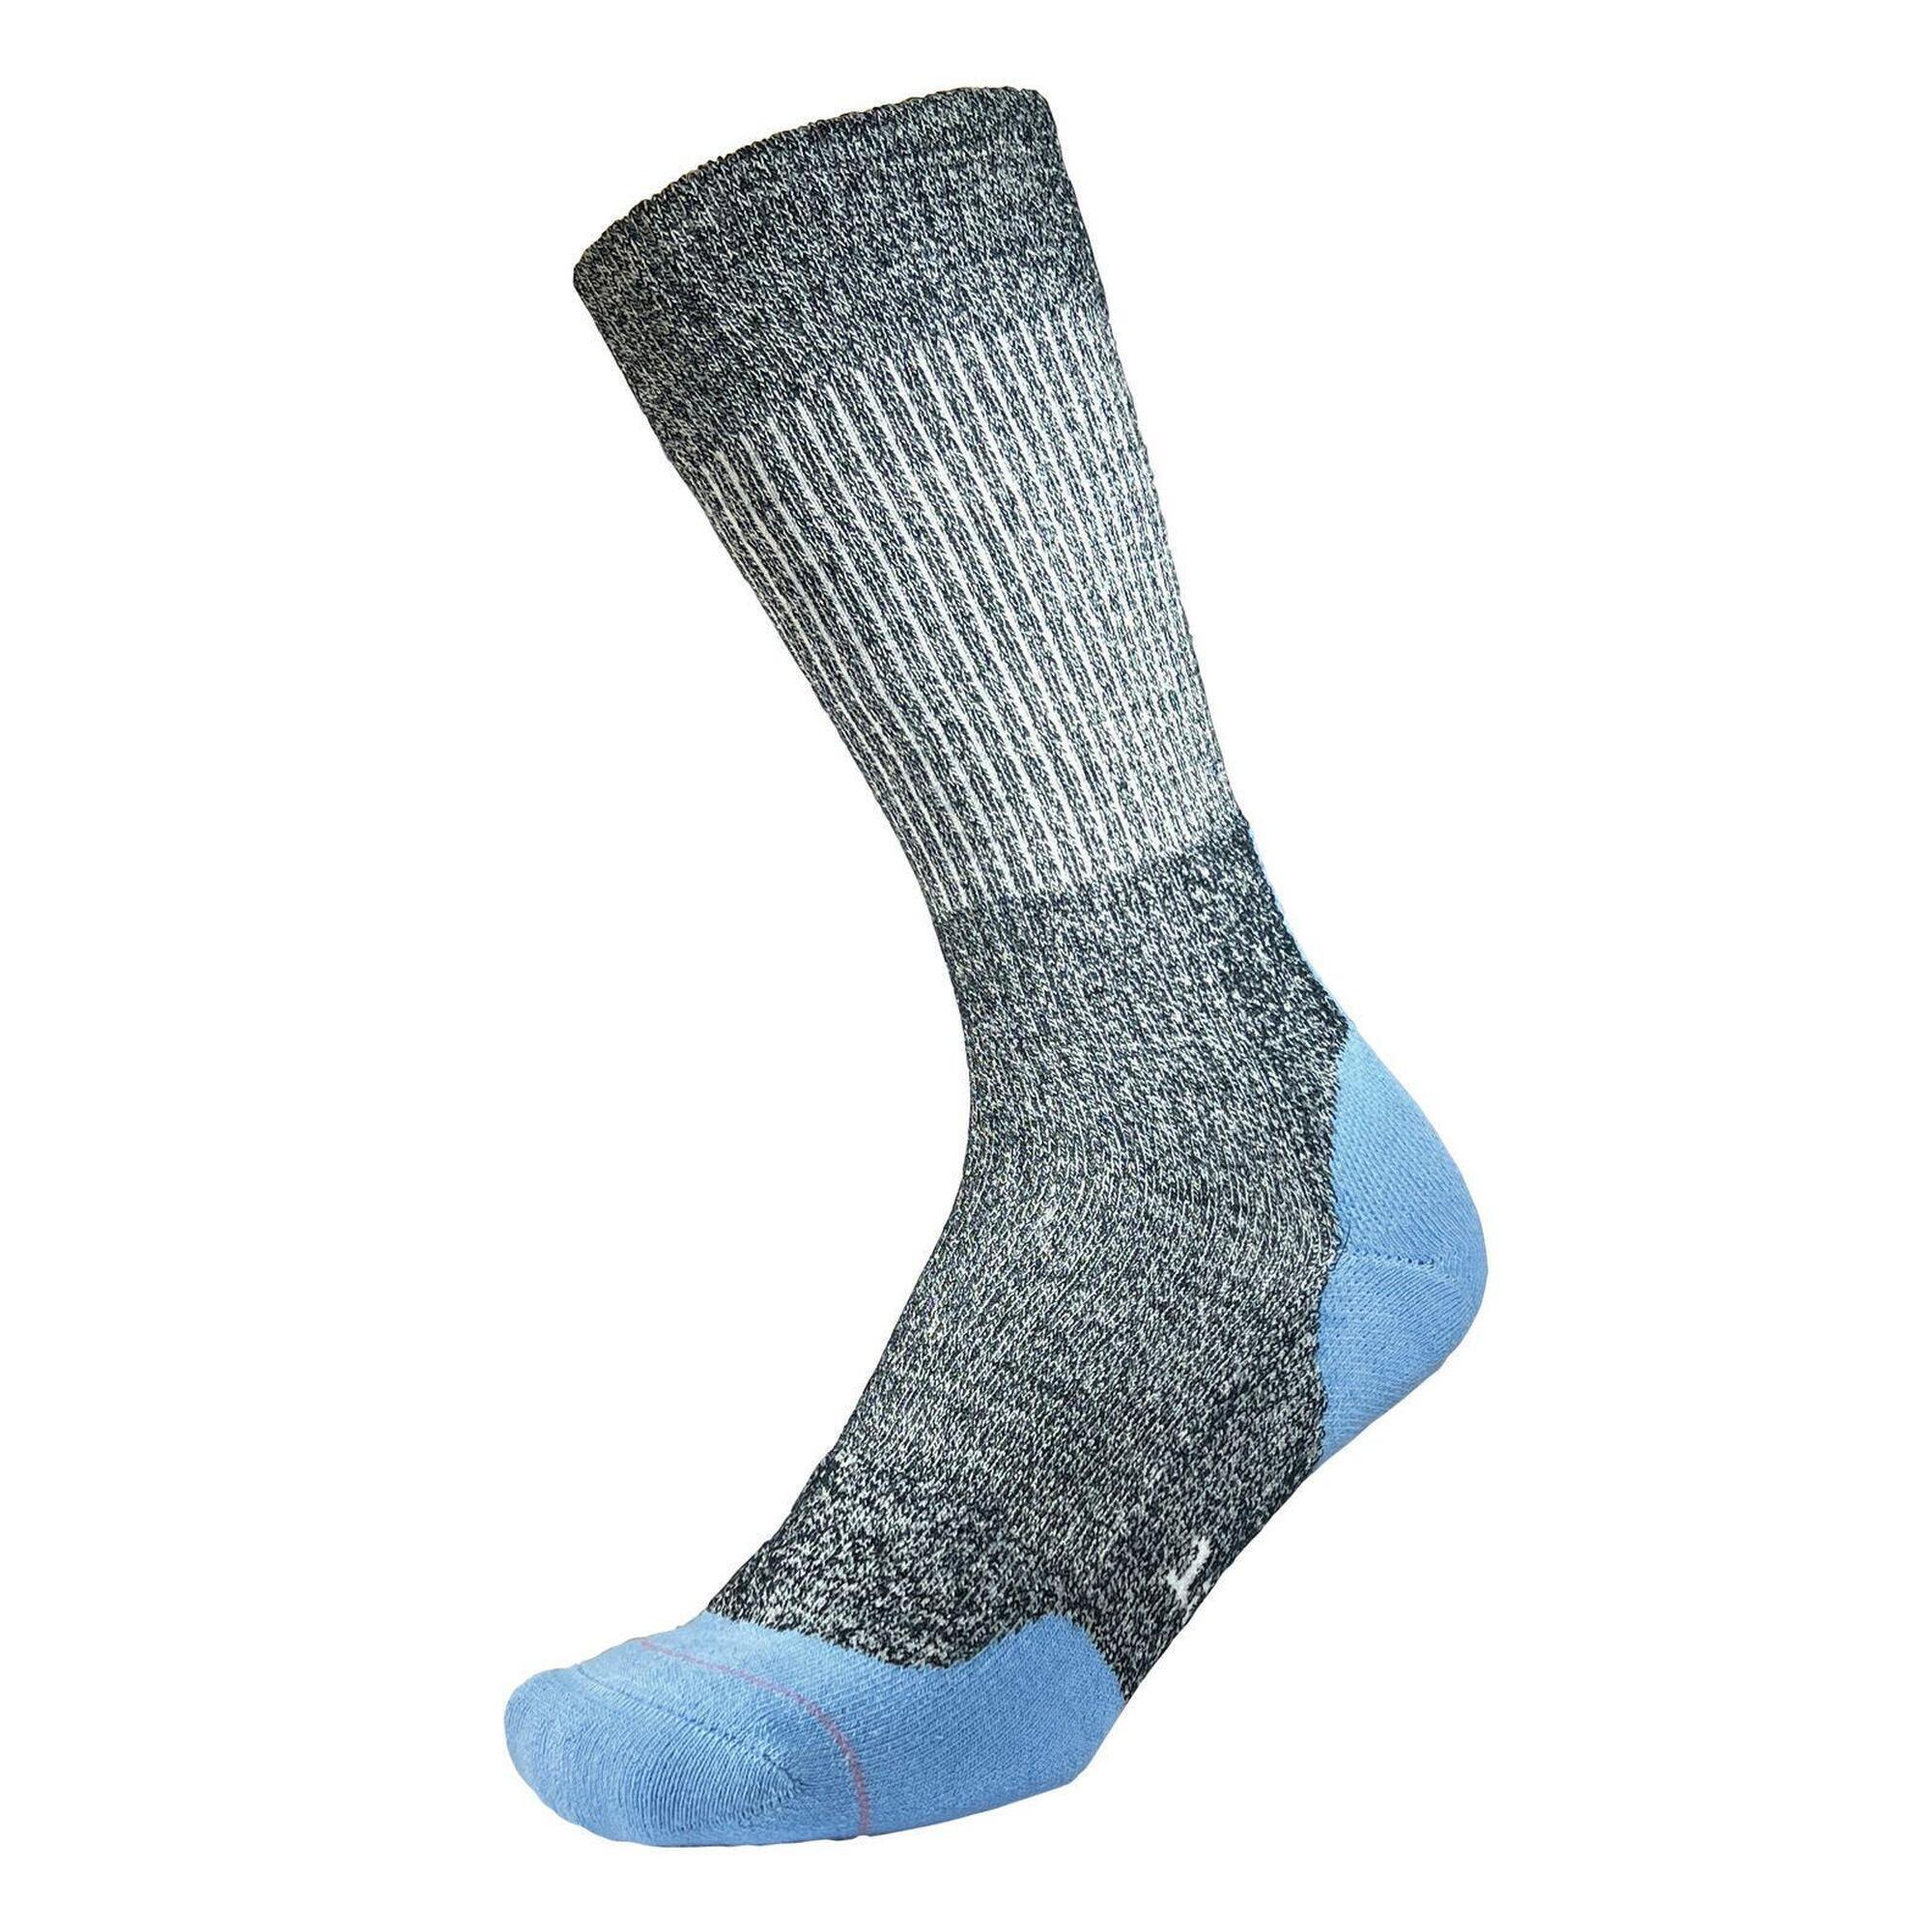 1000 MILE 1000 Mile Fusion Repreve Double Layer Sock Navy Marl/Cornflower